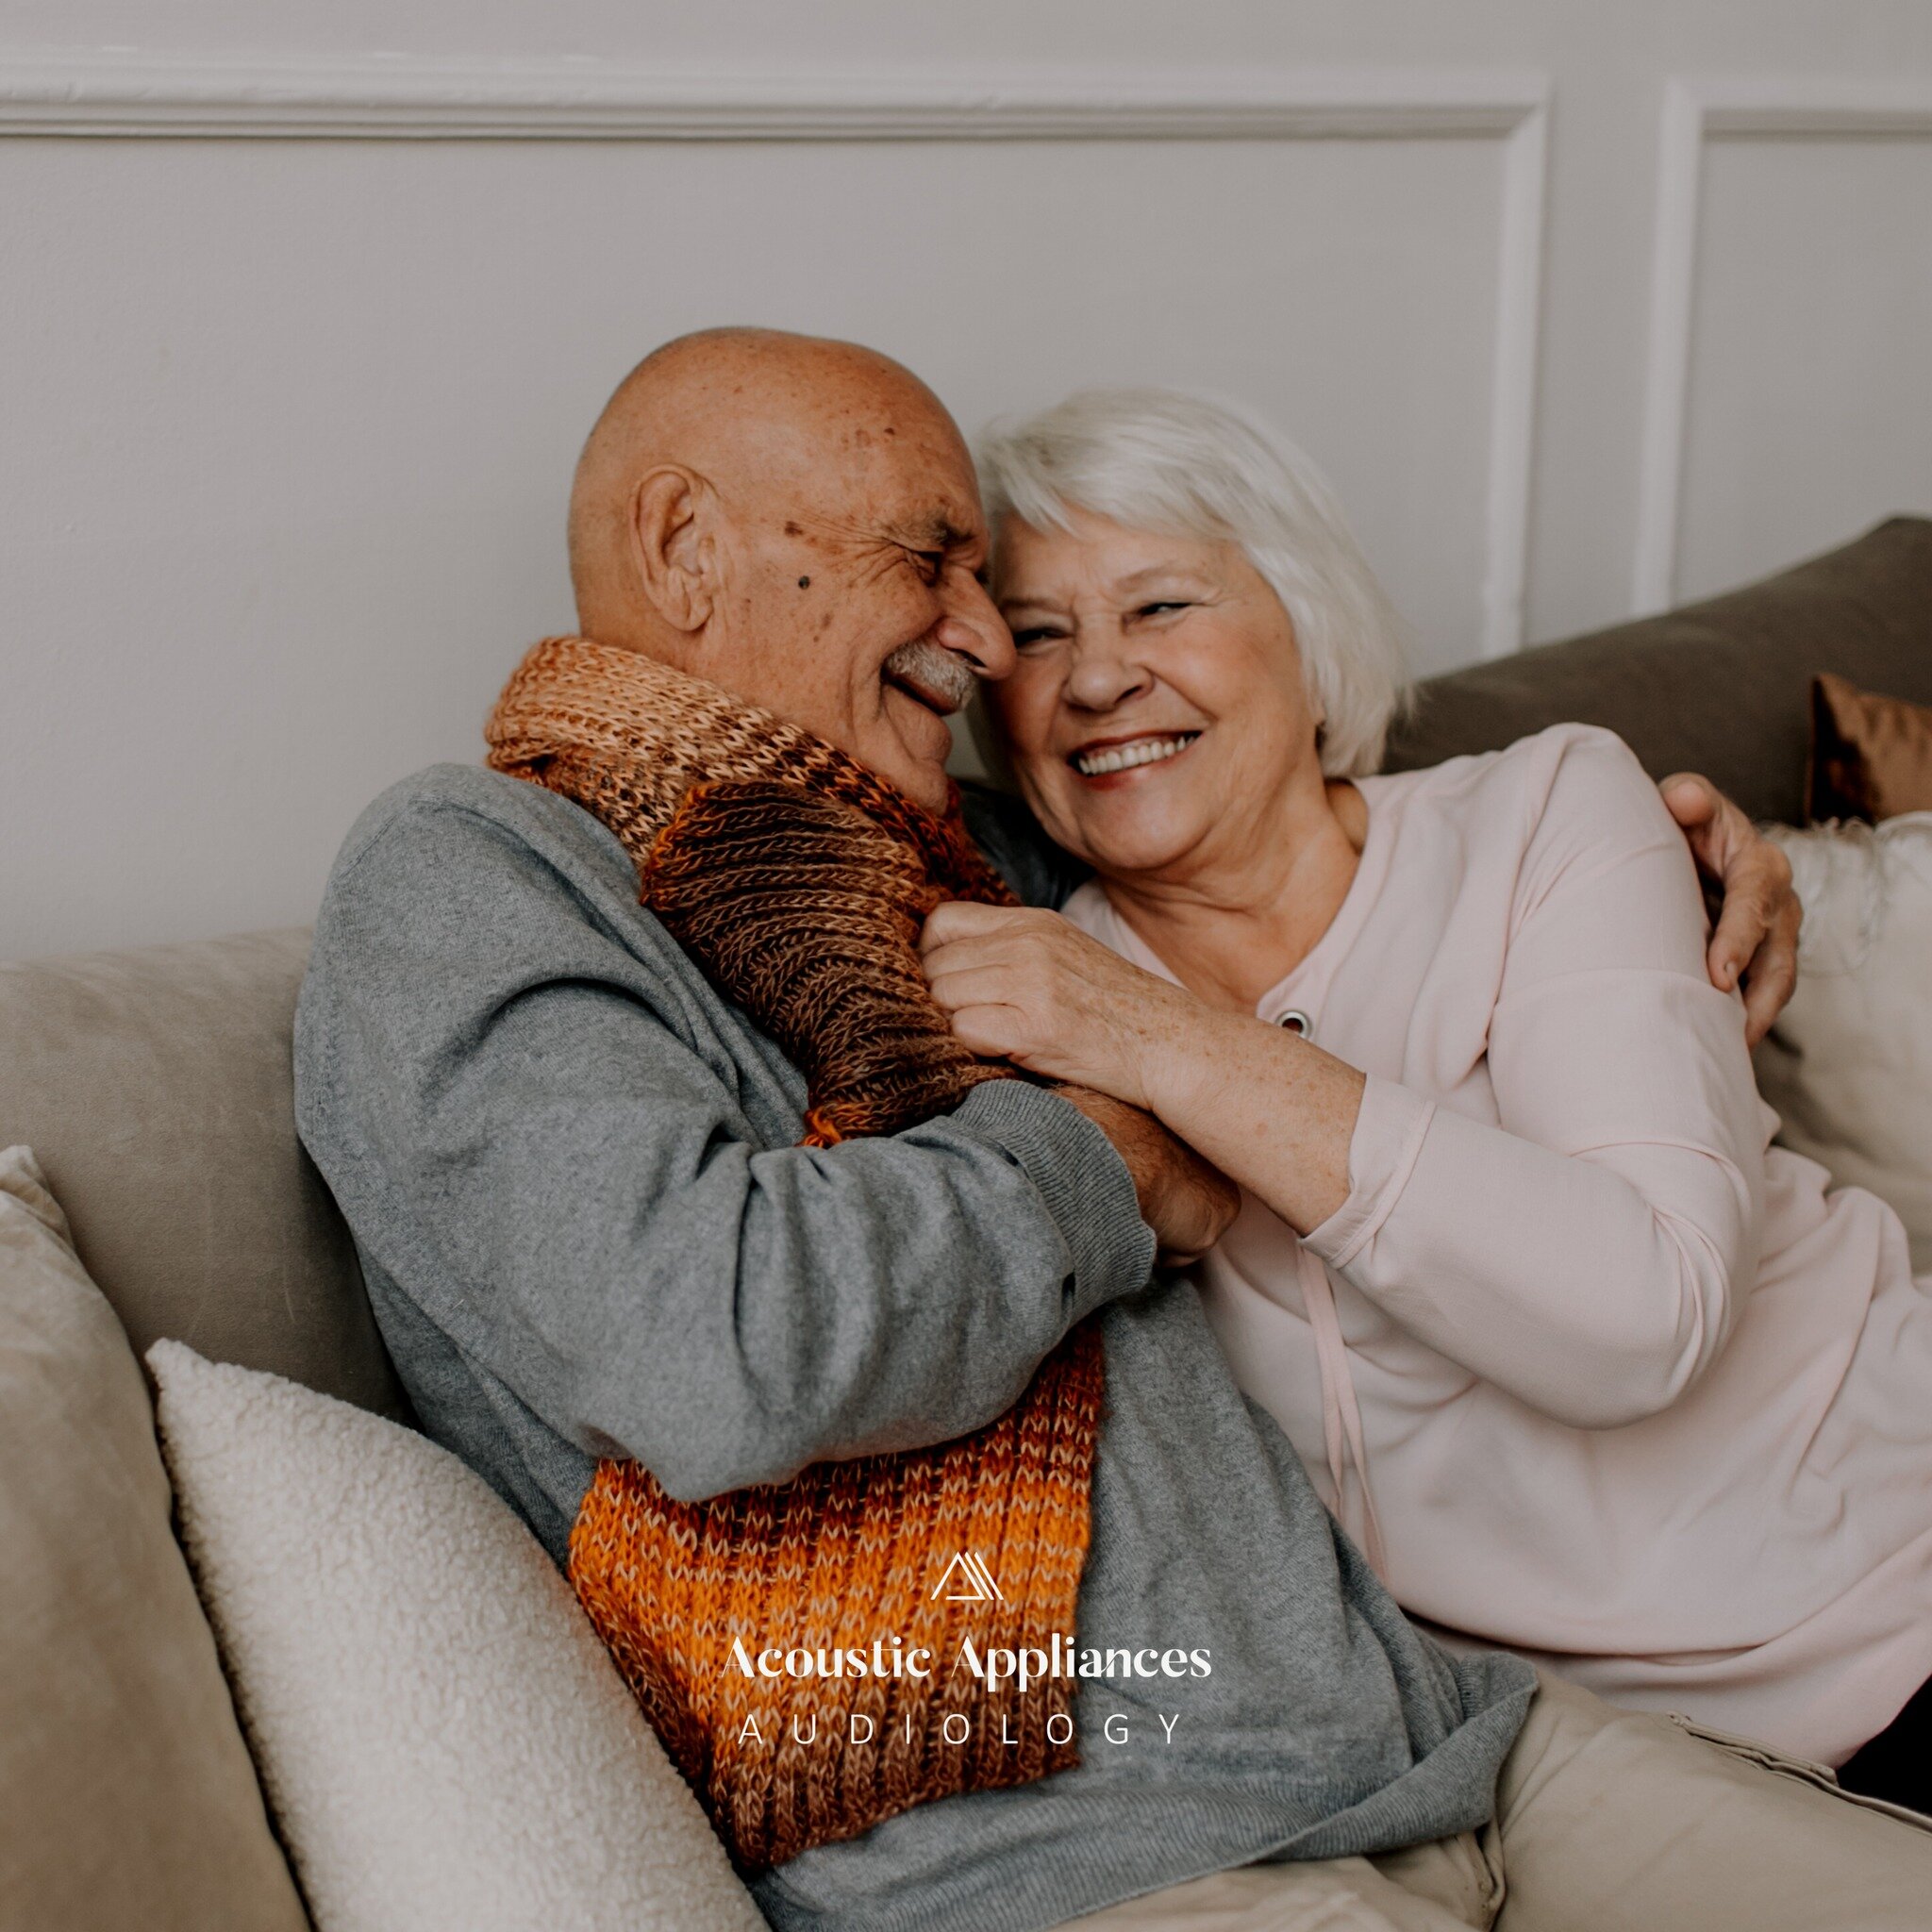 At Acoustic Appliances Audiology, we understand the importance of family and the role hearing plays in bringing loved ones together. 💚 That's why we are committed to providing comprehensive hearing care services for you and your entire family. Wheth